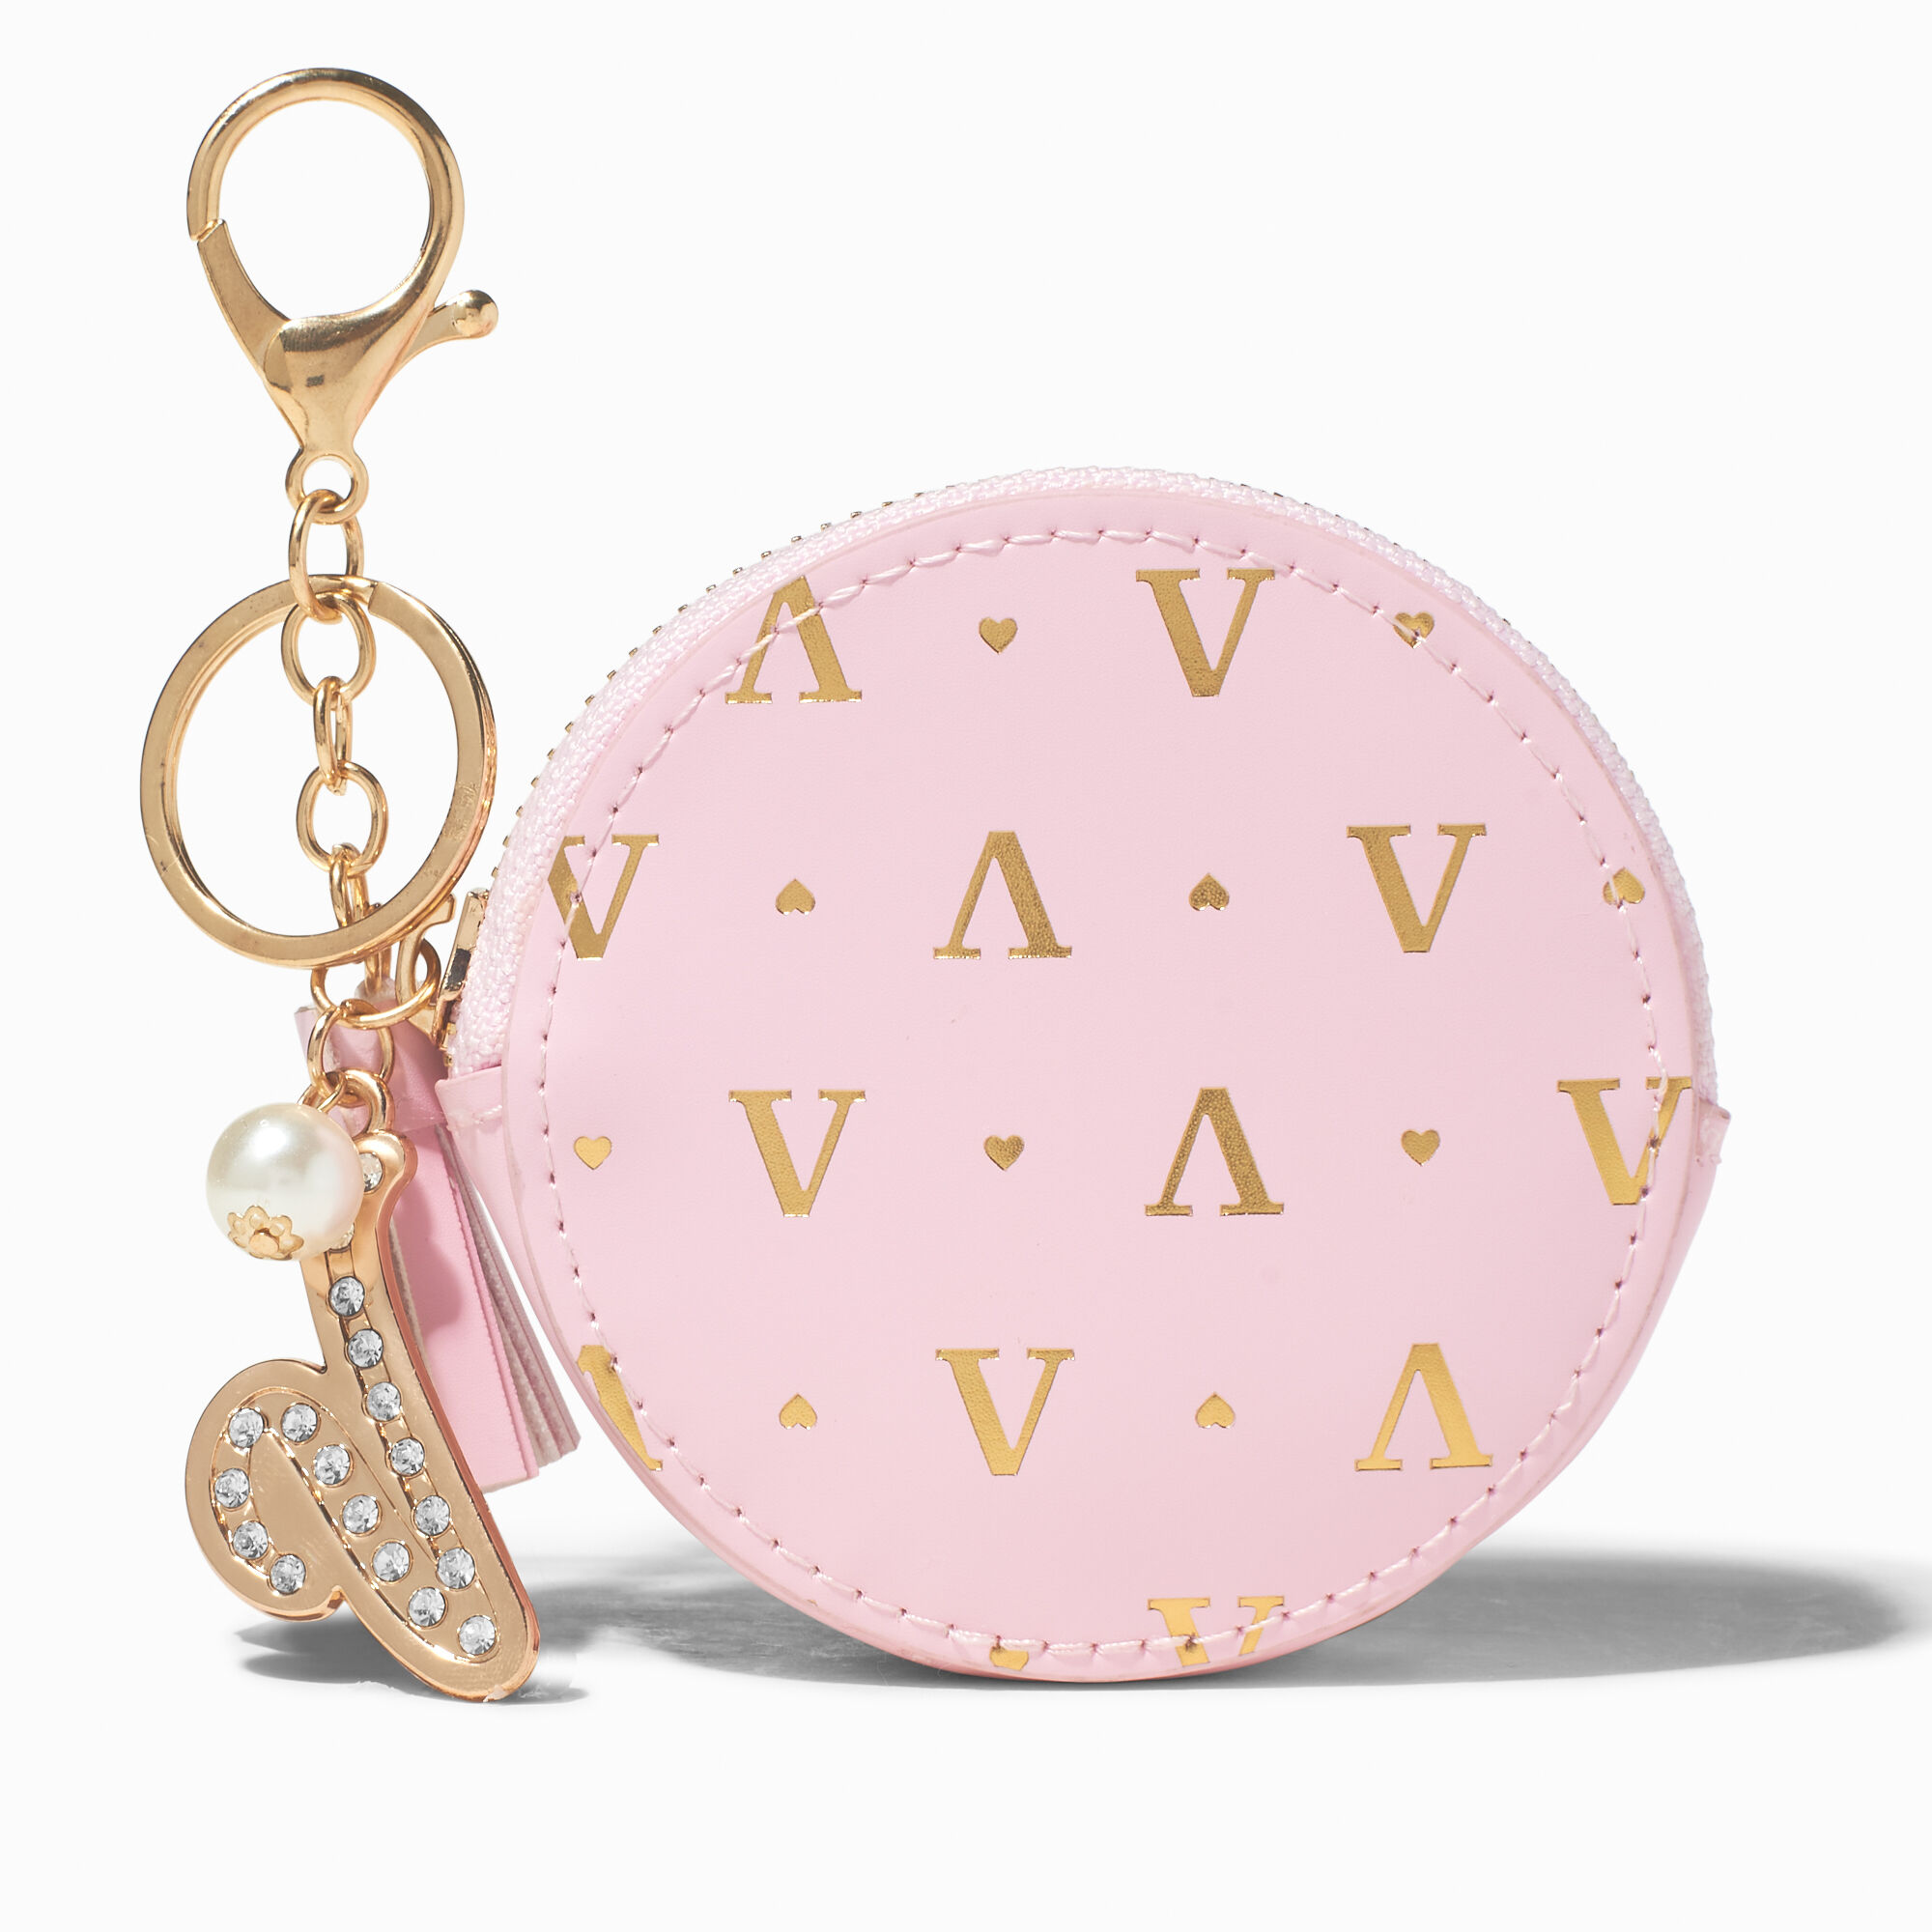 View Claires en Initial Coin Purse V Gold information